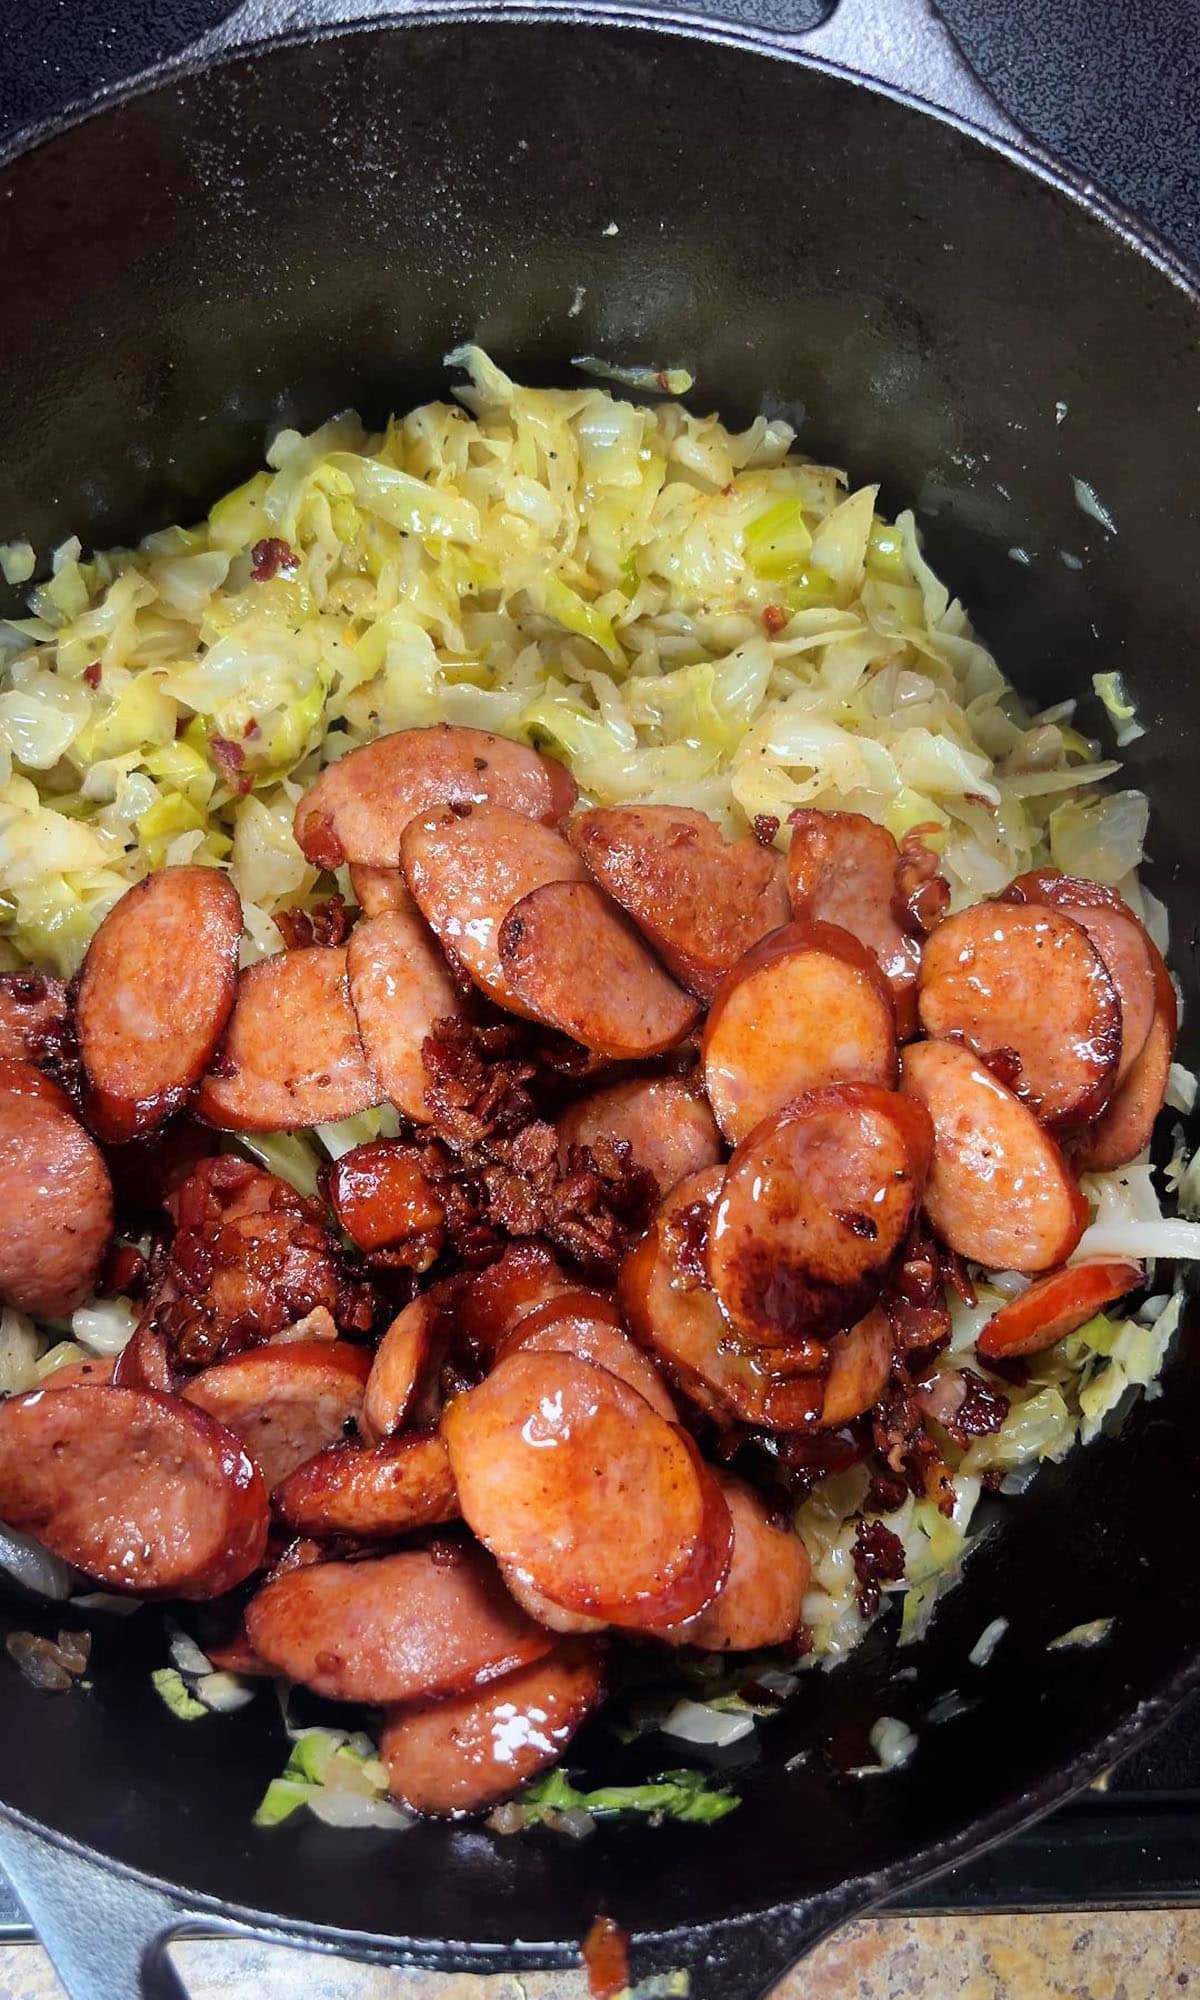 Adding the smoked sausage and bacon back to the pot of fried cabbage.